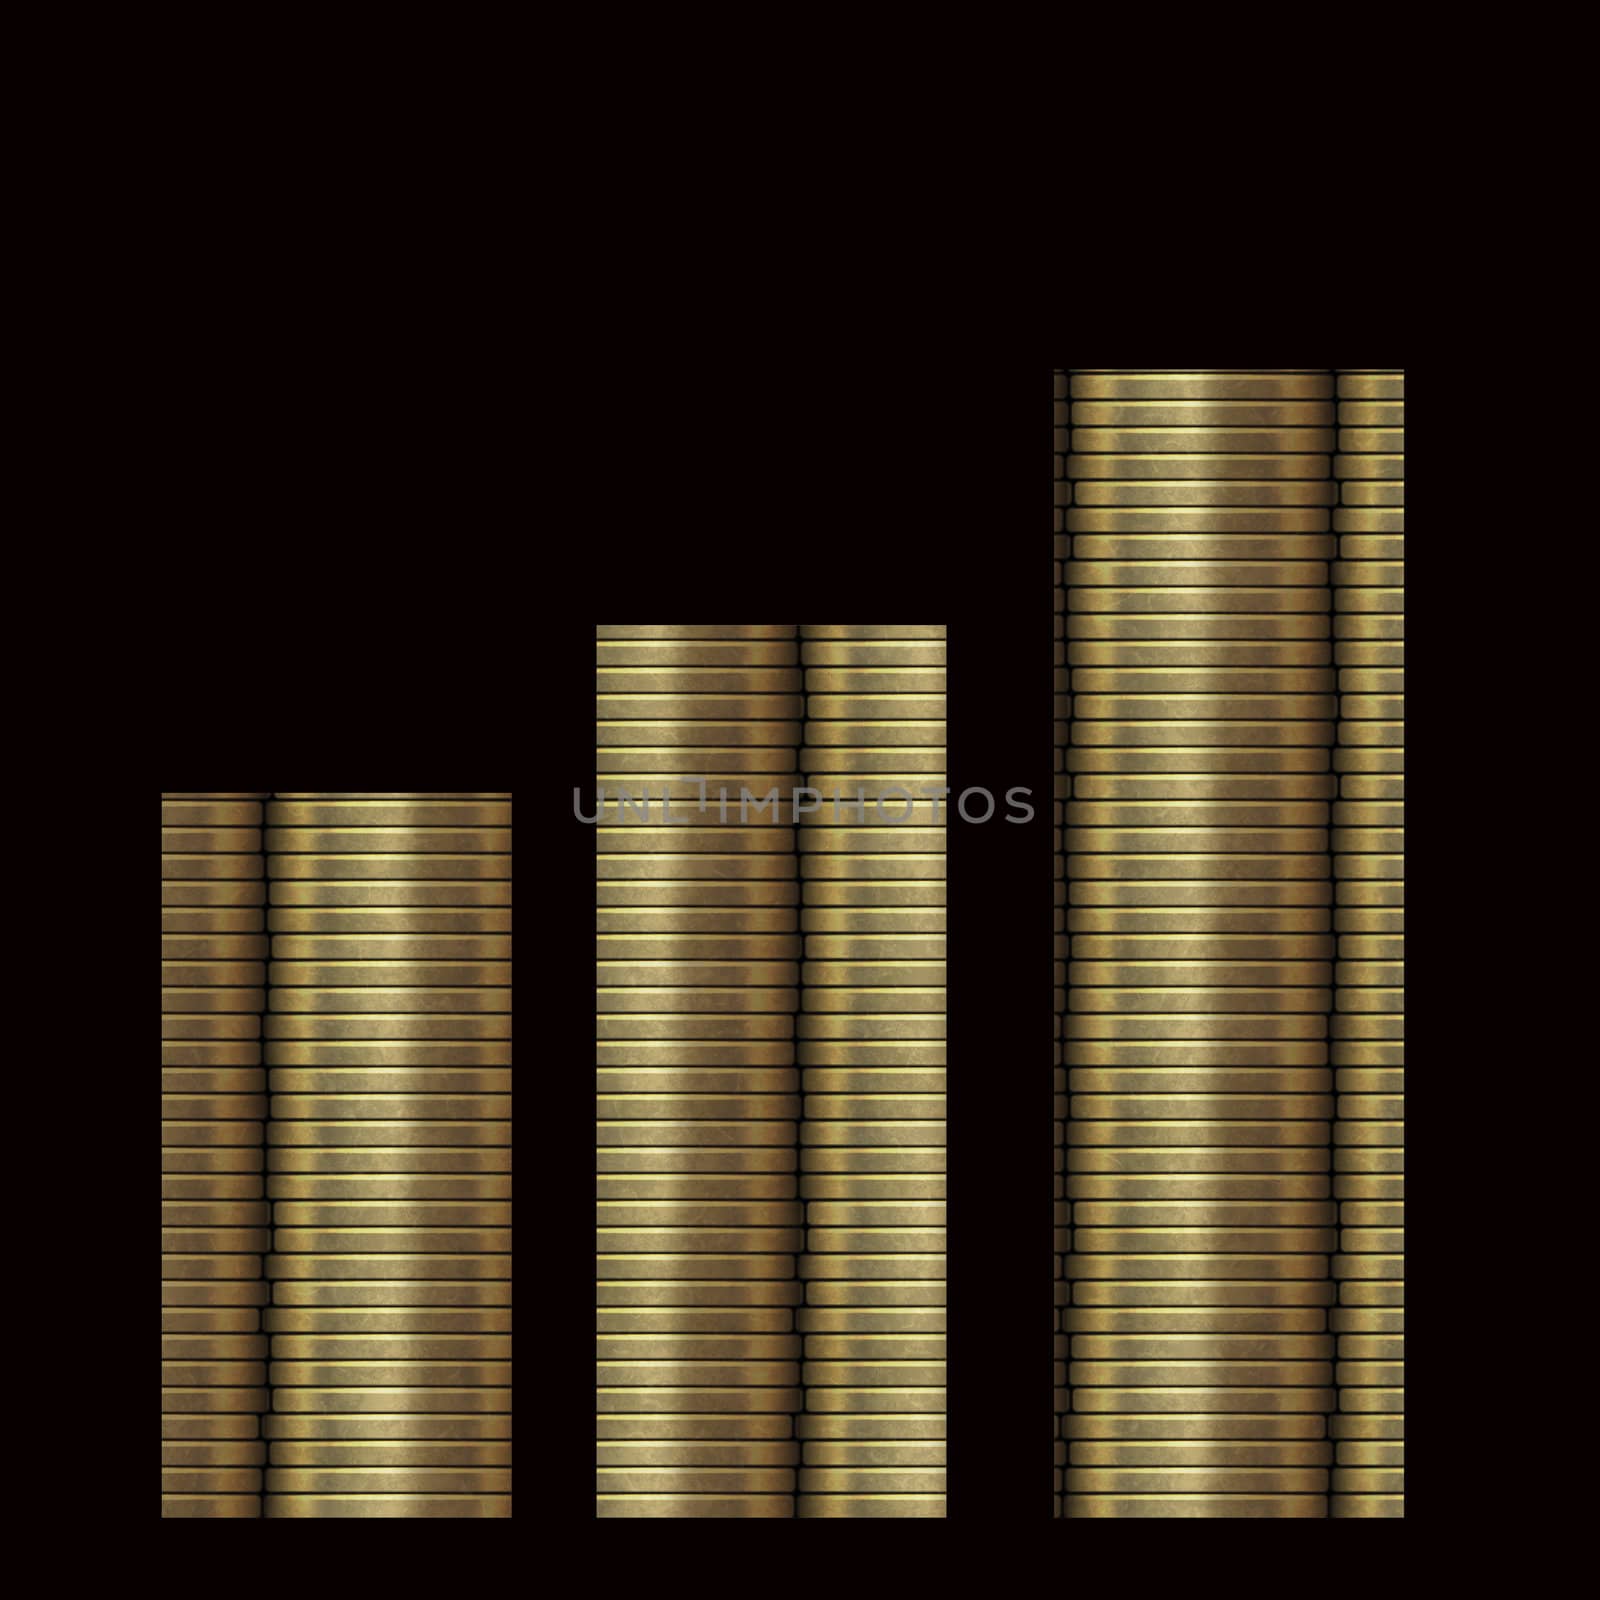 bar graph of coin stack by nadil